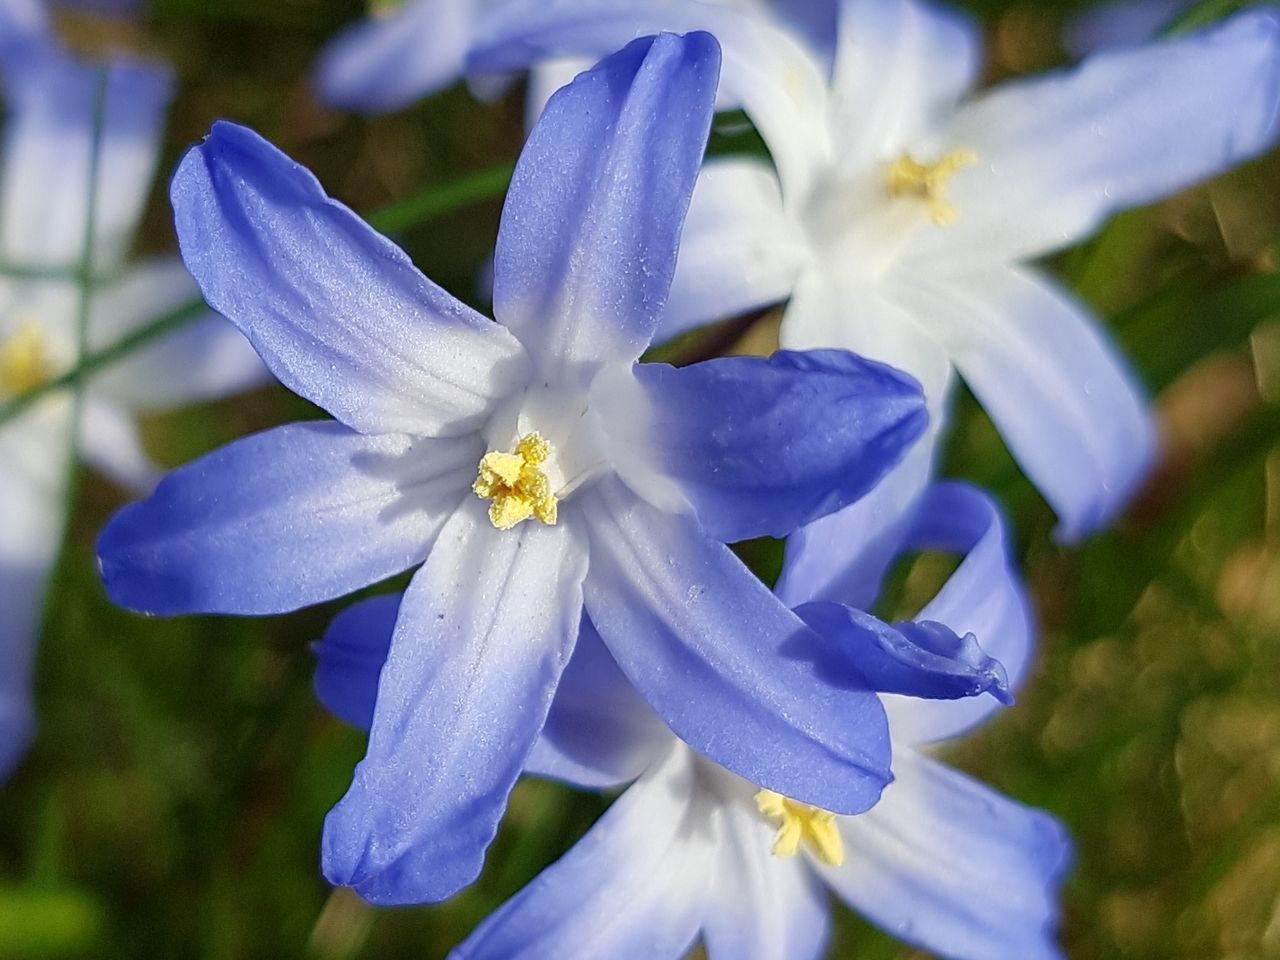 CLOSE-UP OF BLUE FLOWERS